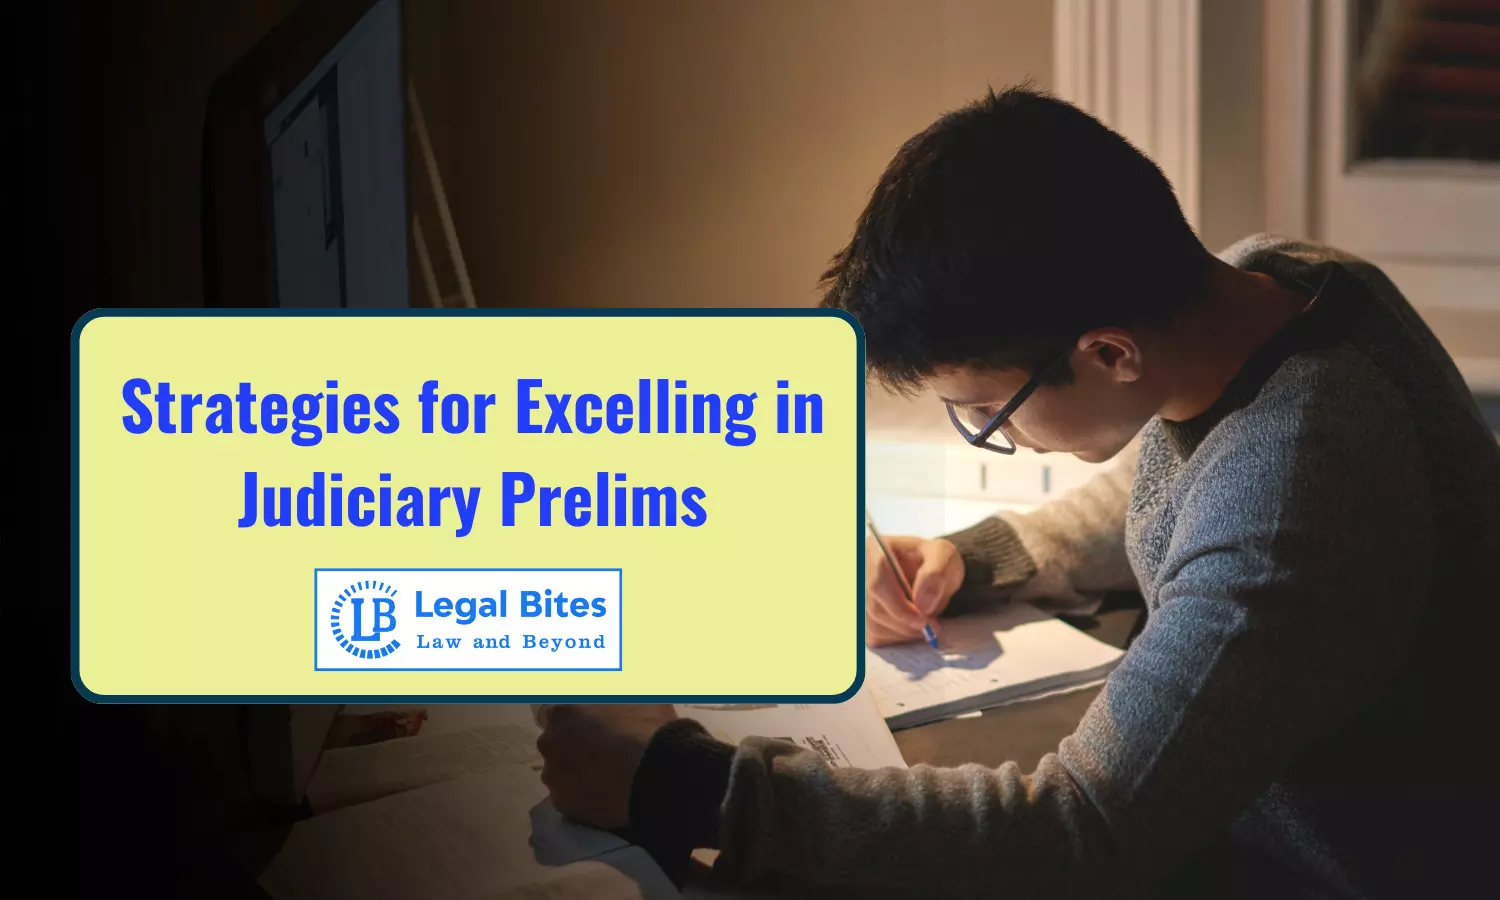 Strategies for Excelling in Judiciary Prelims